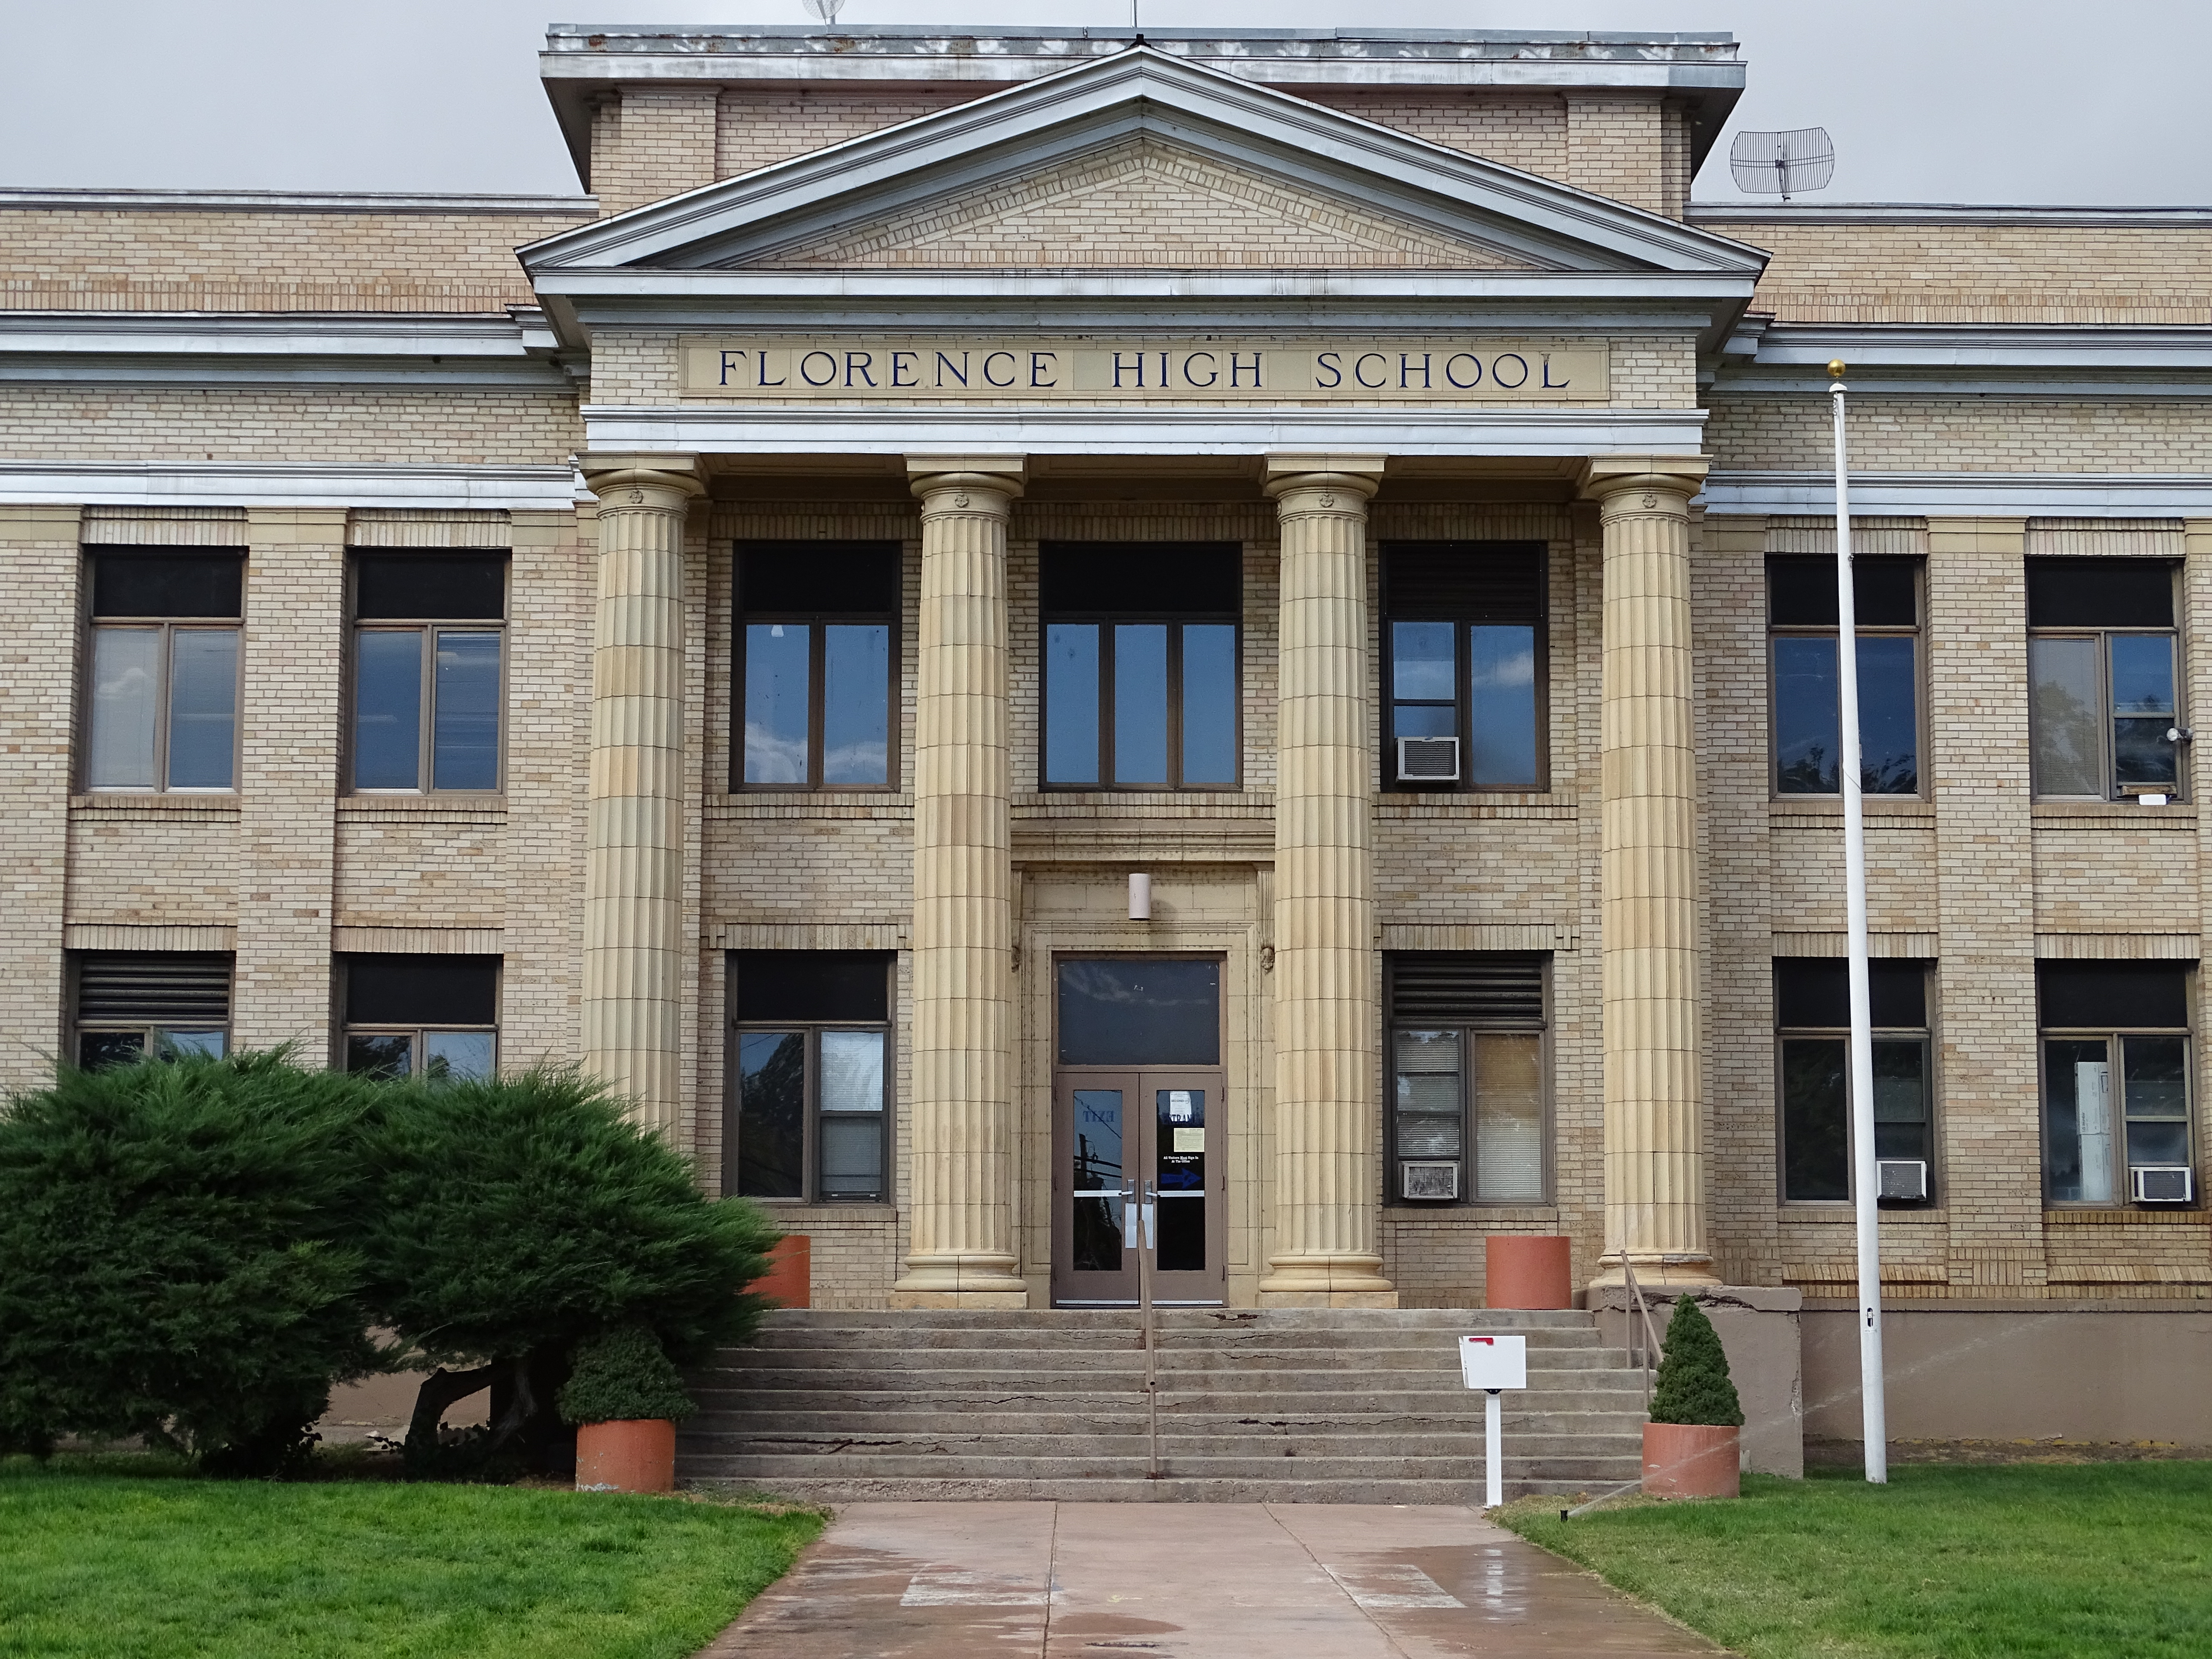 A photo of the front entrance to Florence High School, a blonde brick building with a classical style entablature supported by four large Doric columns.